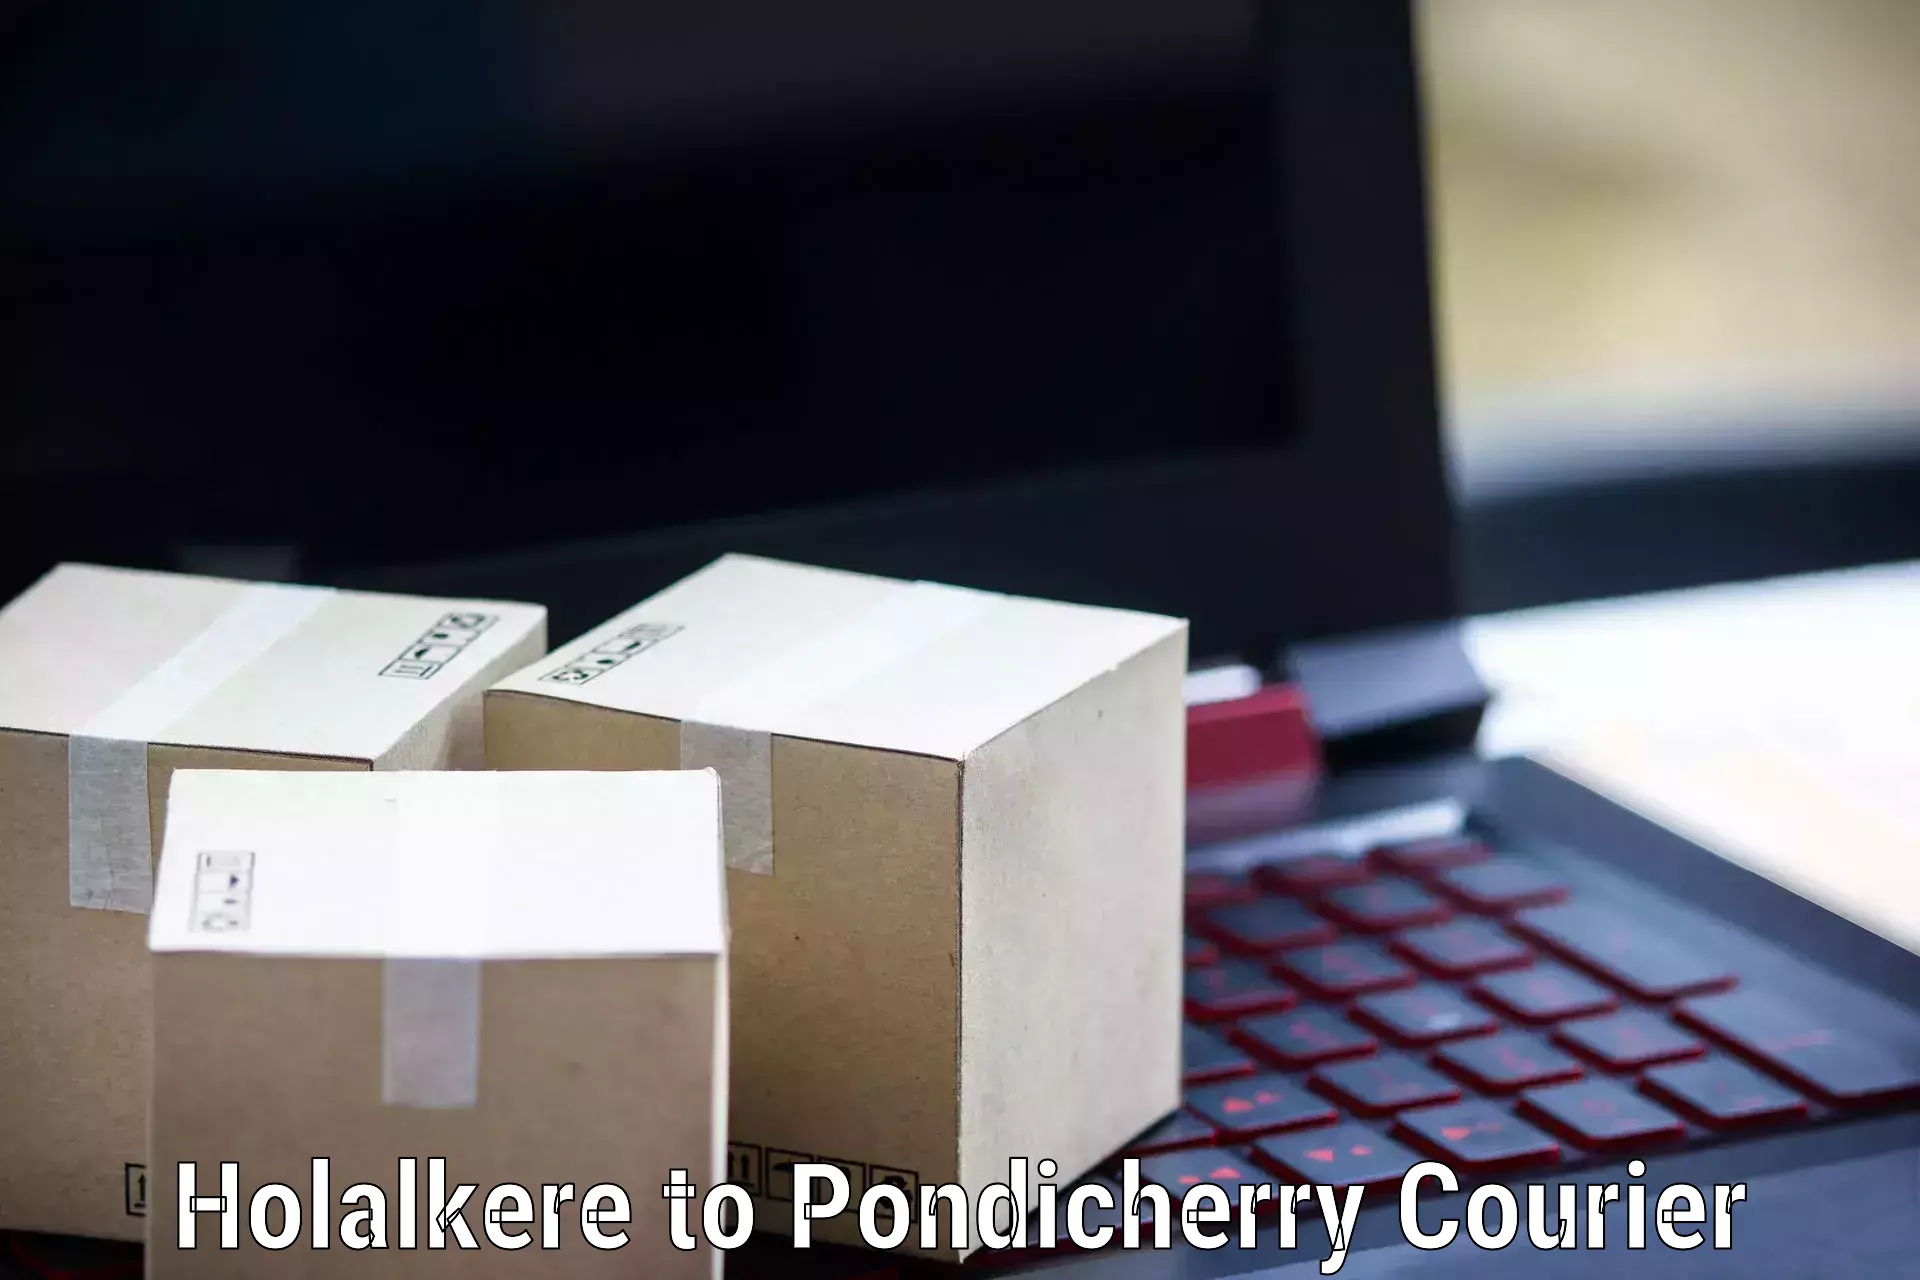 Global courier networks Holalkere to Pondicherry